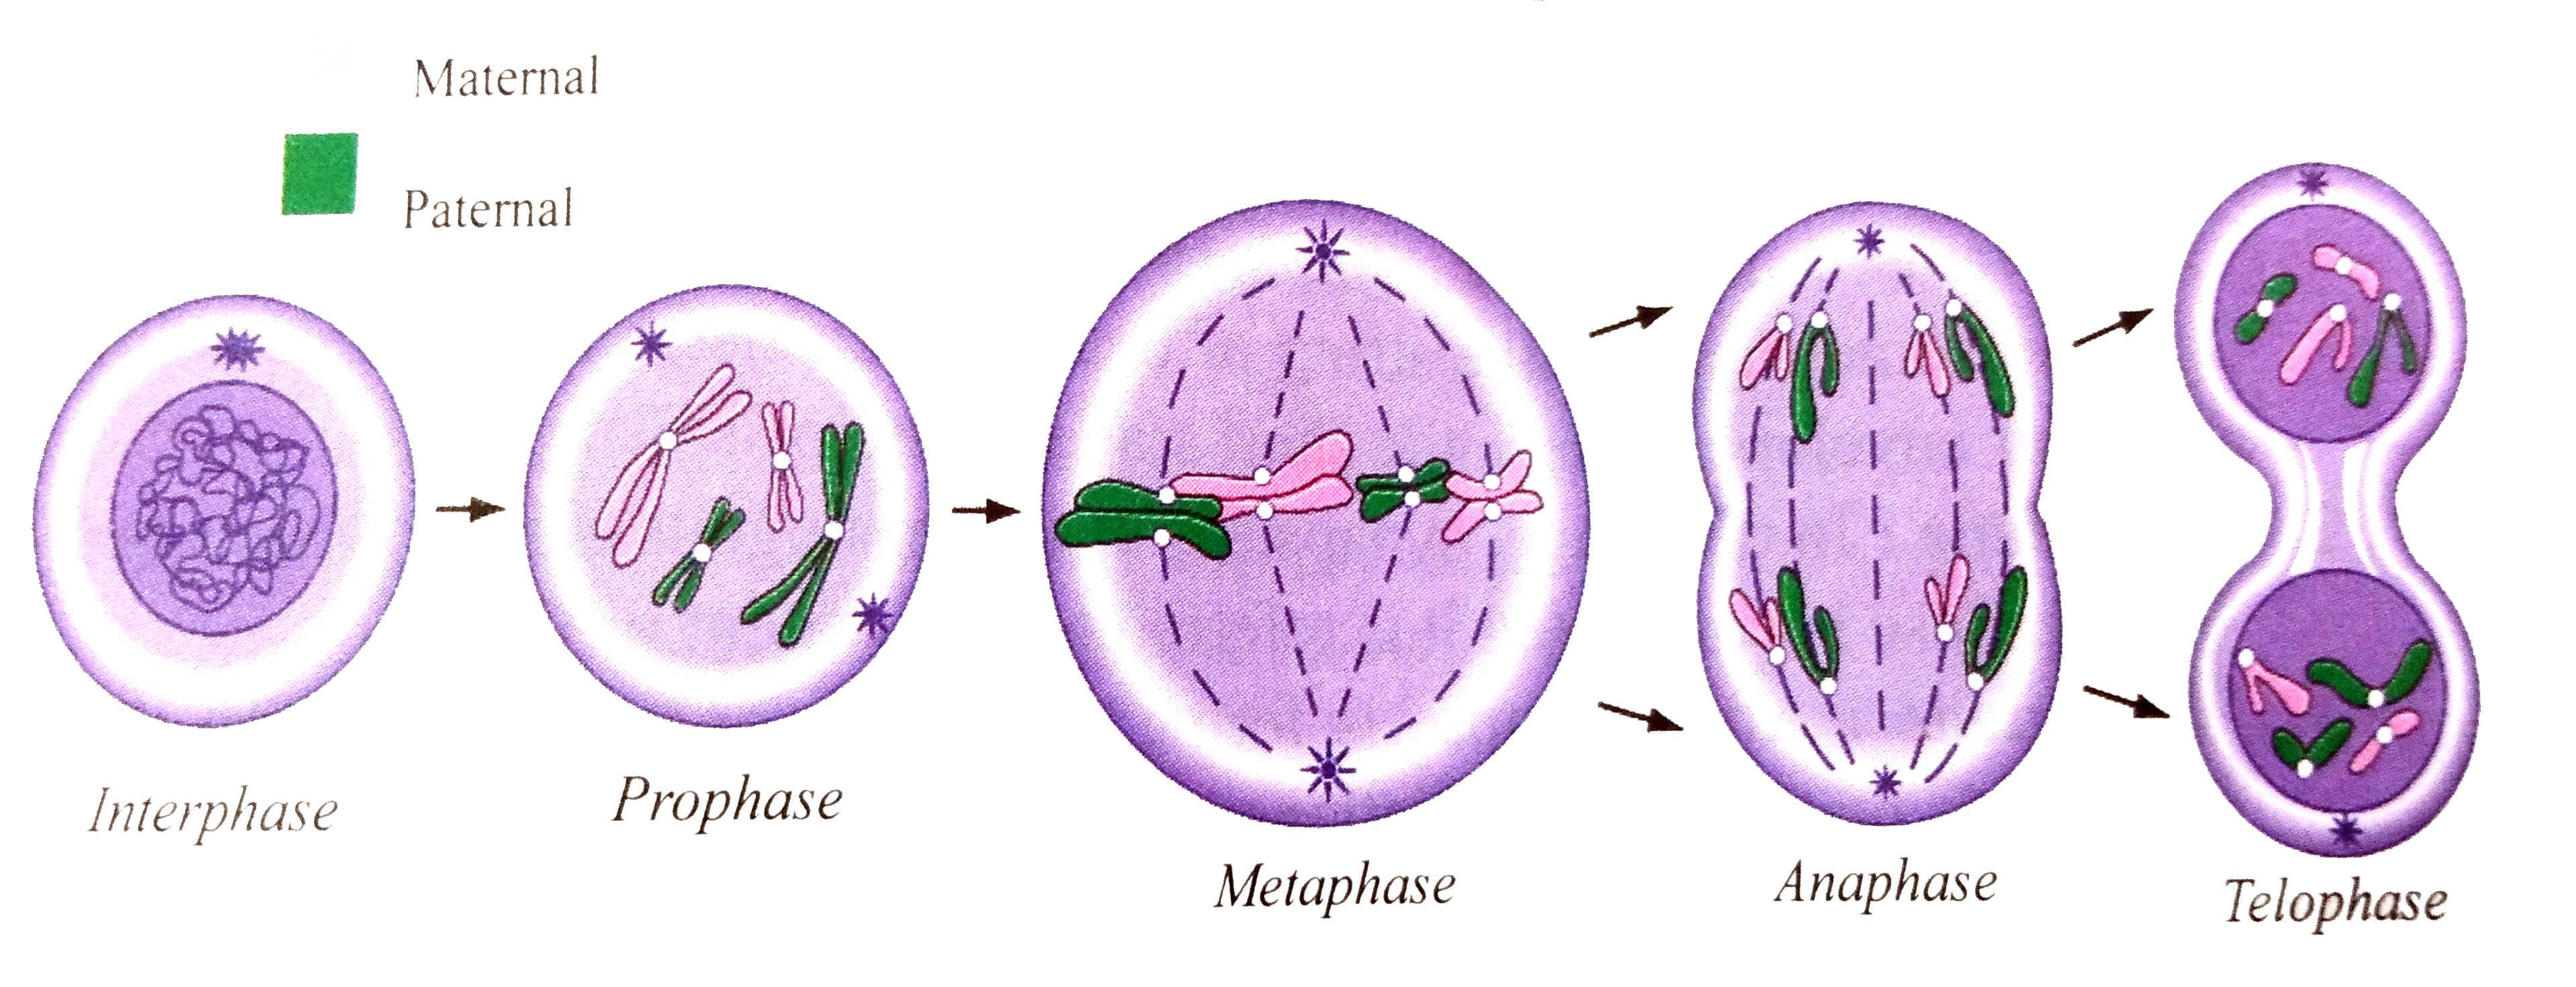 With the help of suitable diagrams, explain the mitosis in detail.